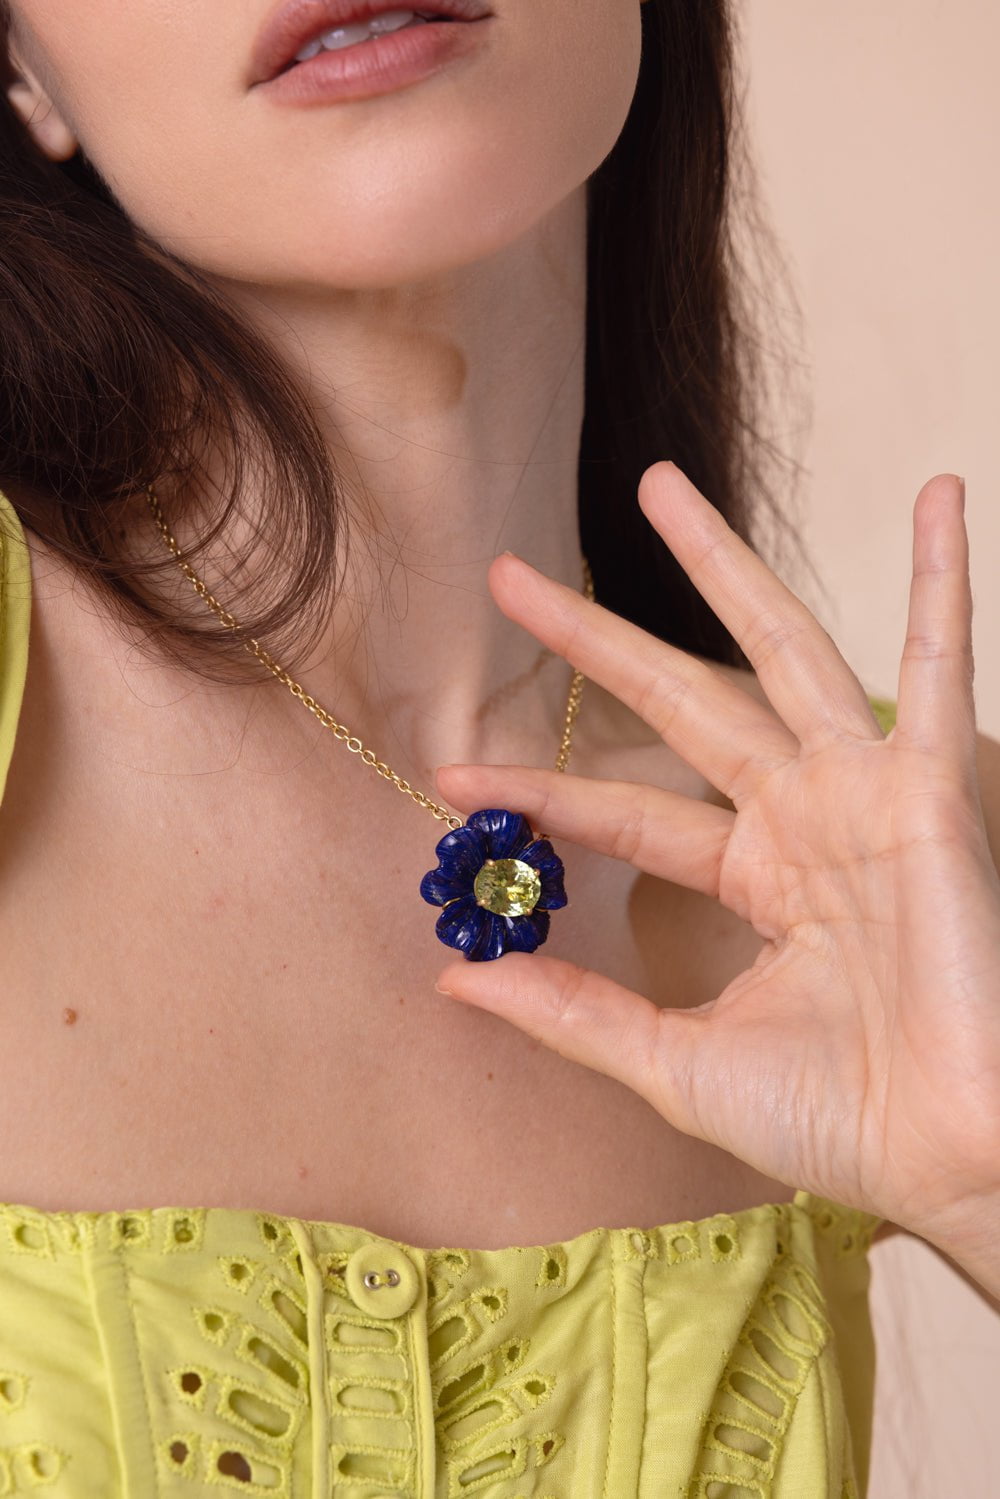 IRENE NEUWIRTH JEWELRY-Carved Lapis Tropical Flower Necklace-YELLOW GOLD